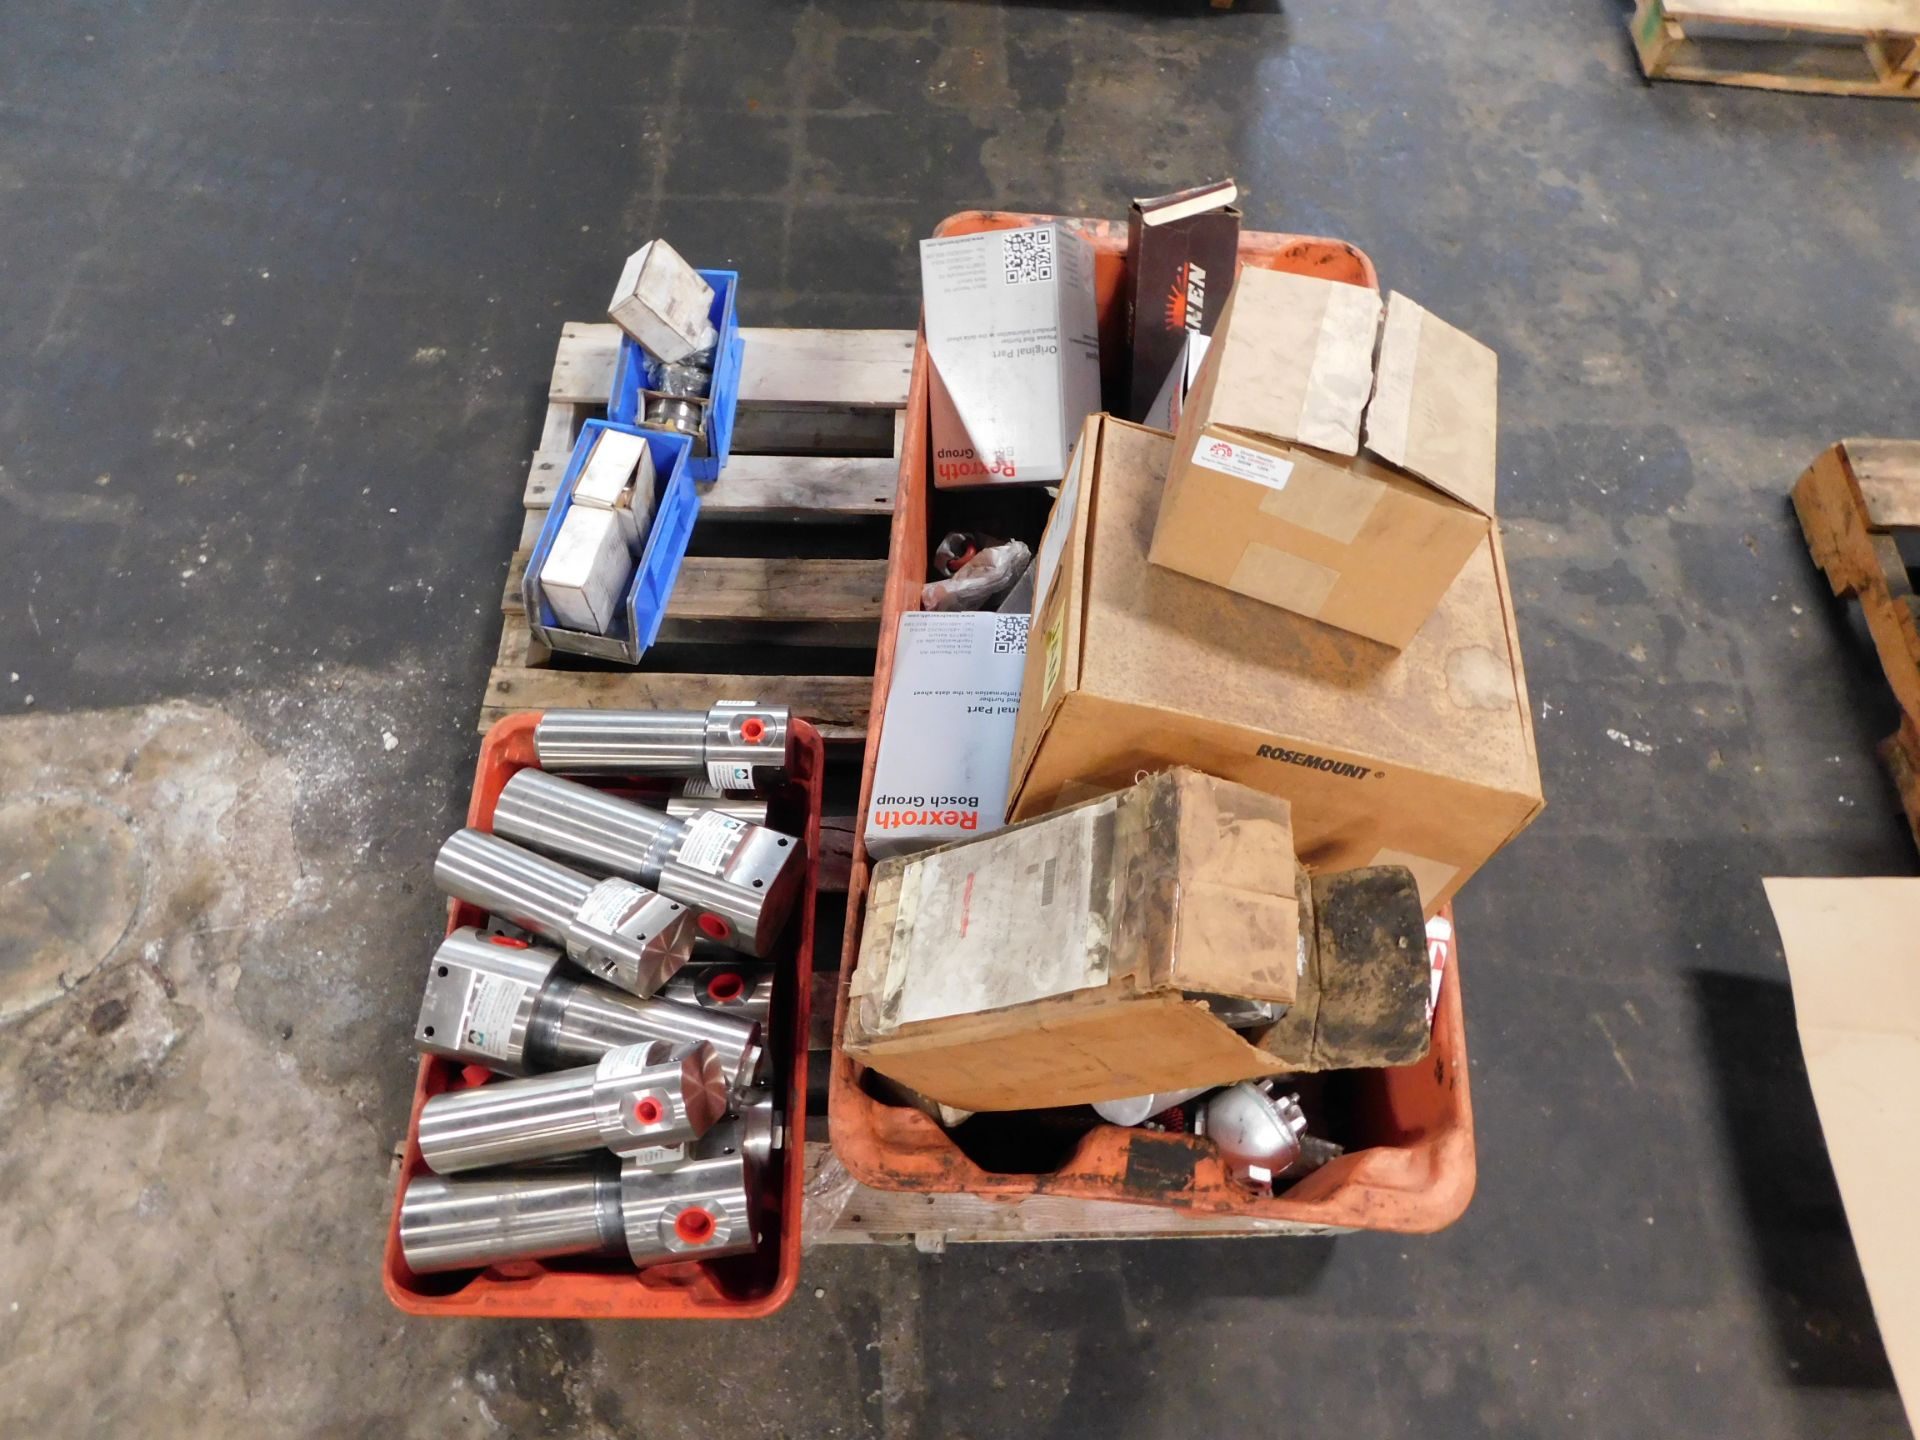 LOT OF MISC NORMAN AND REXROTH FILTERS, ROSEMOUNT 8732EST1A1N0M4 TRANSMITTER, AND SUNNEN STONE SETS.